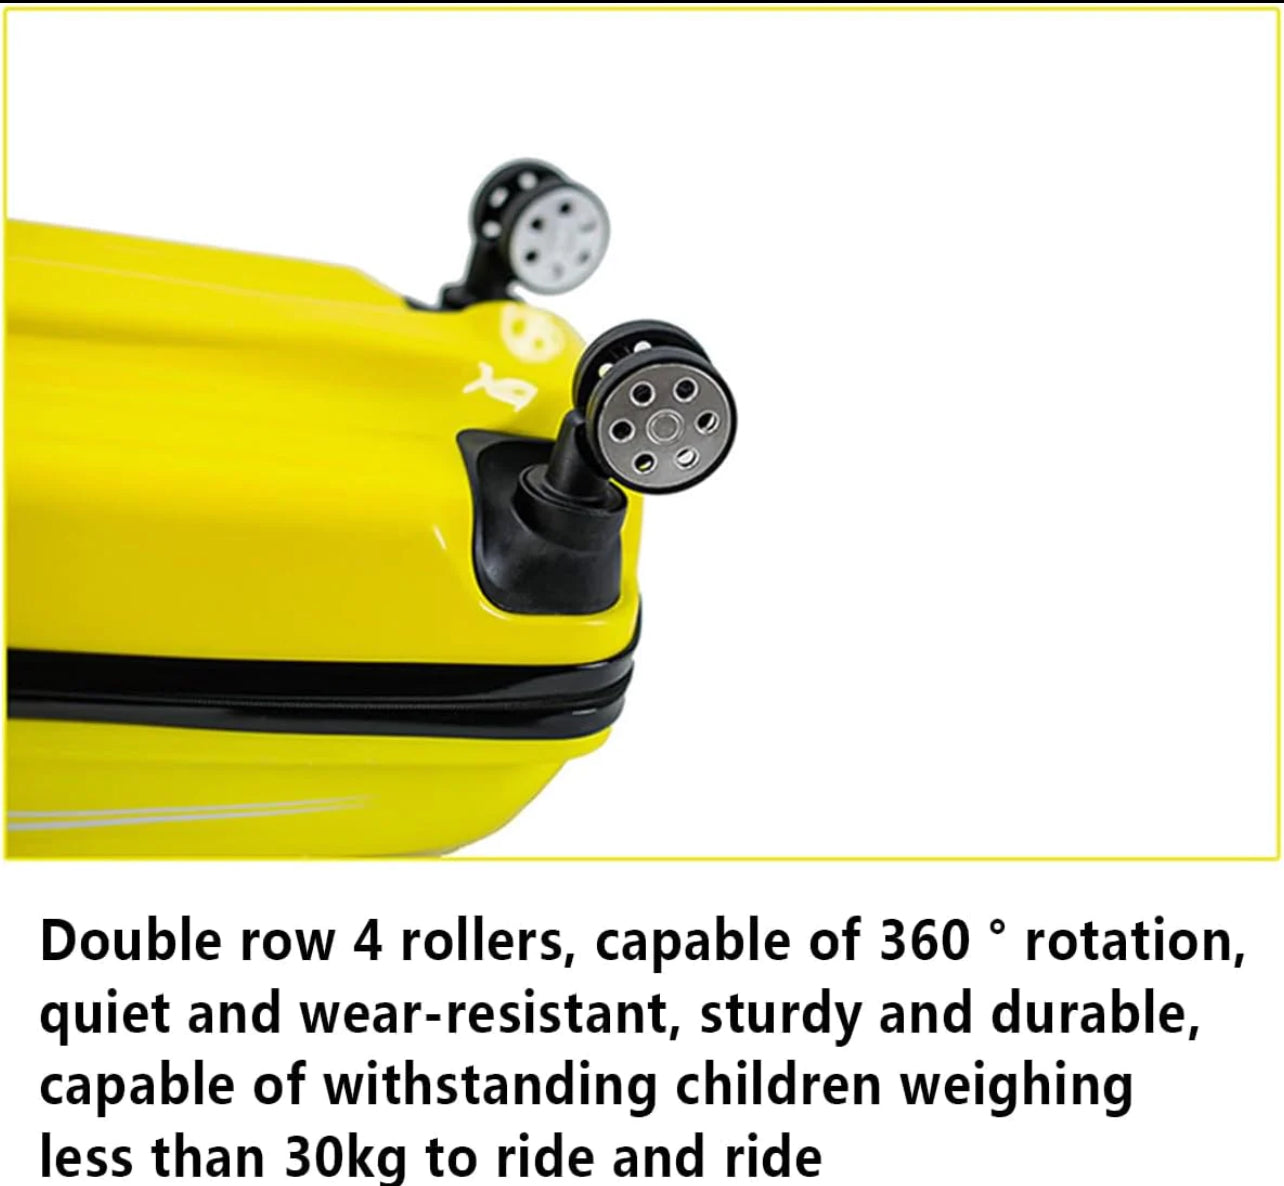 Ride On - Children's Trolley with Playful Car Designs